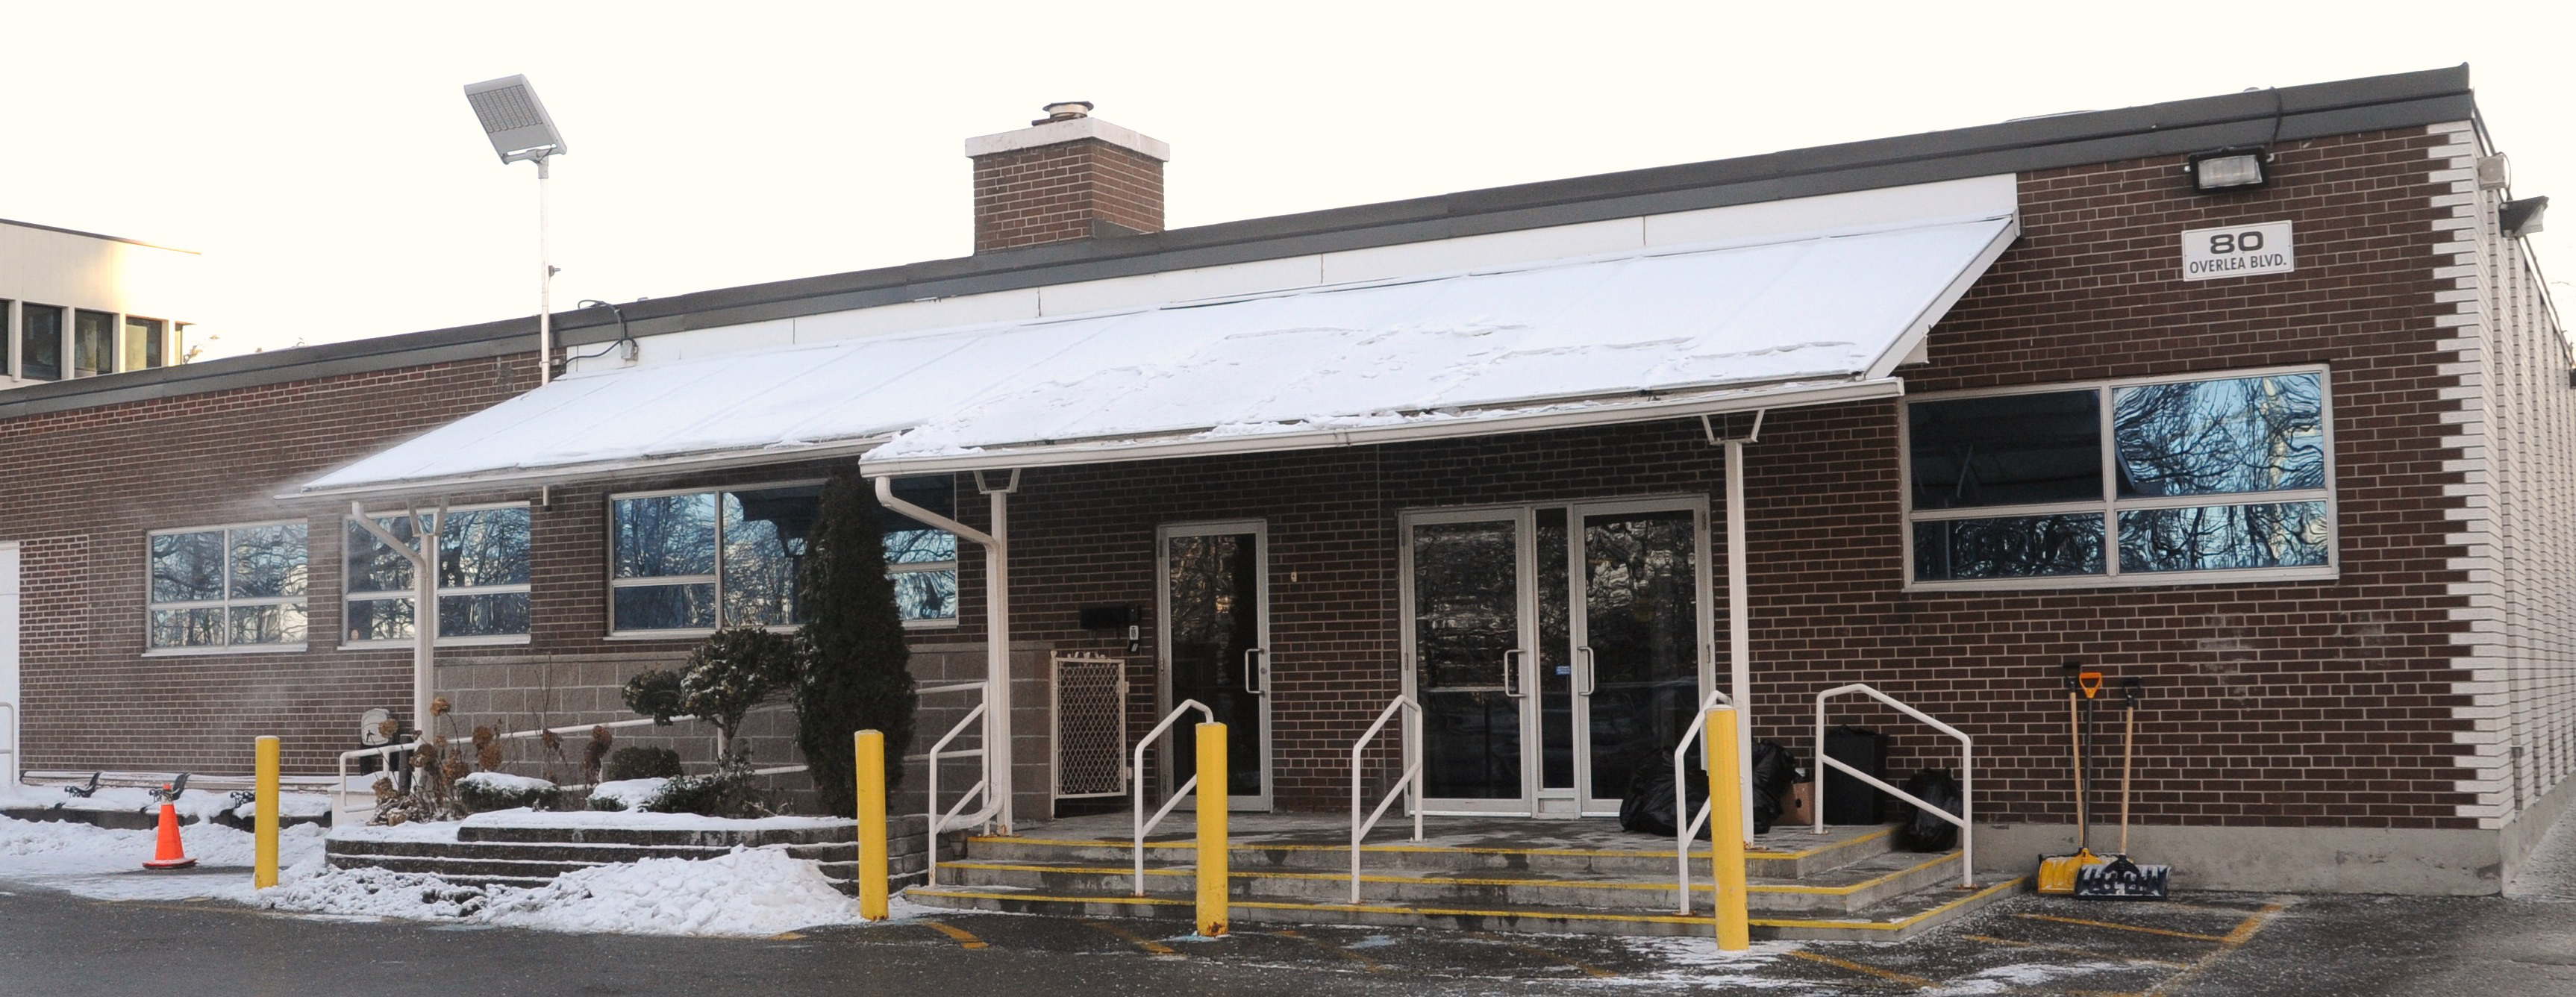 In the aftermath of the ice storm, Don Mills Jamatkhana opened its doors to the public as a neighbourhood warming centre. Photo: Courtesy of the Ismaili Council for Canada